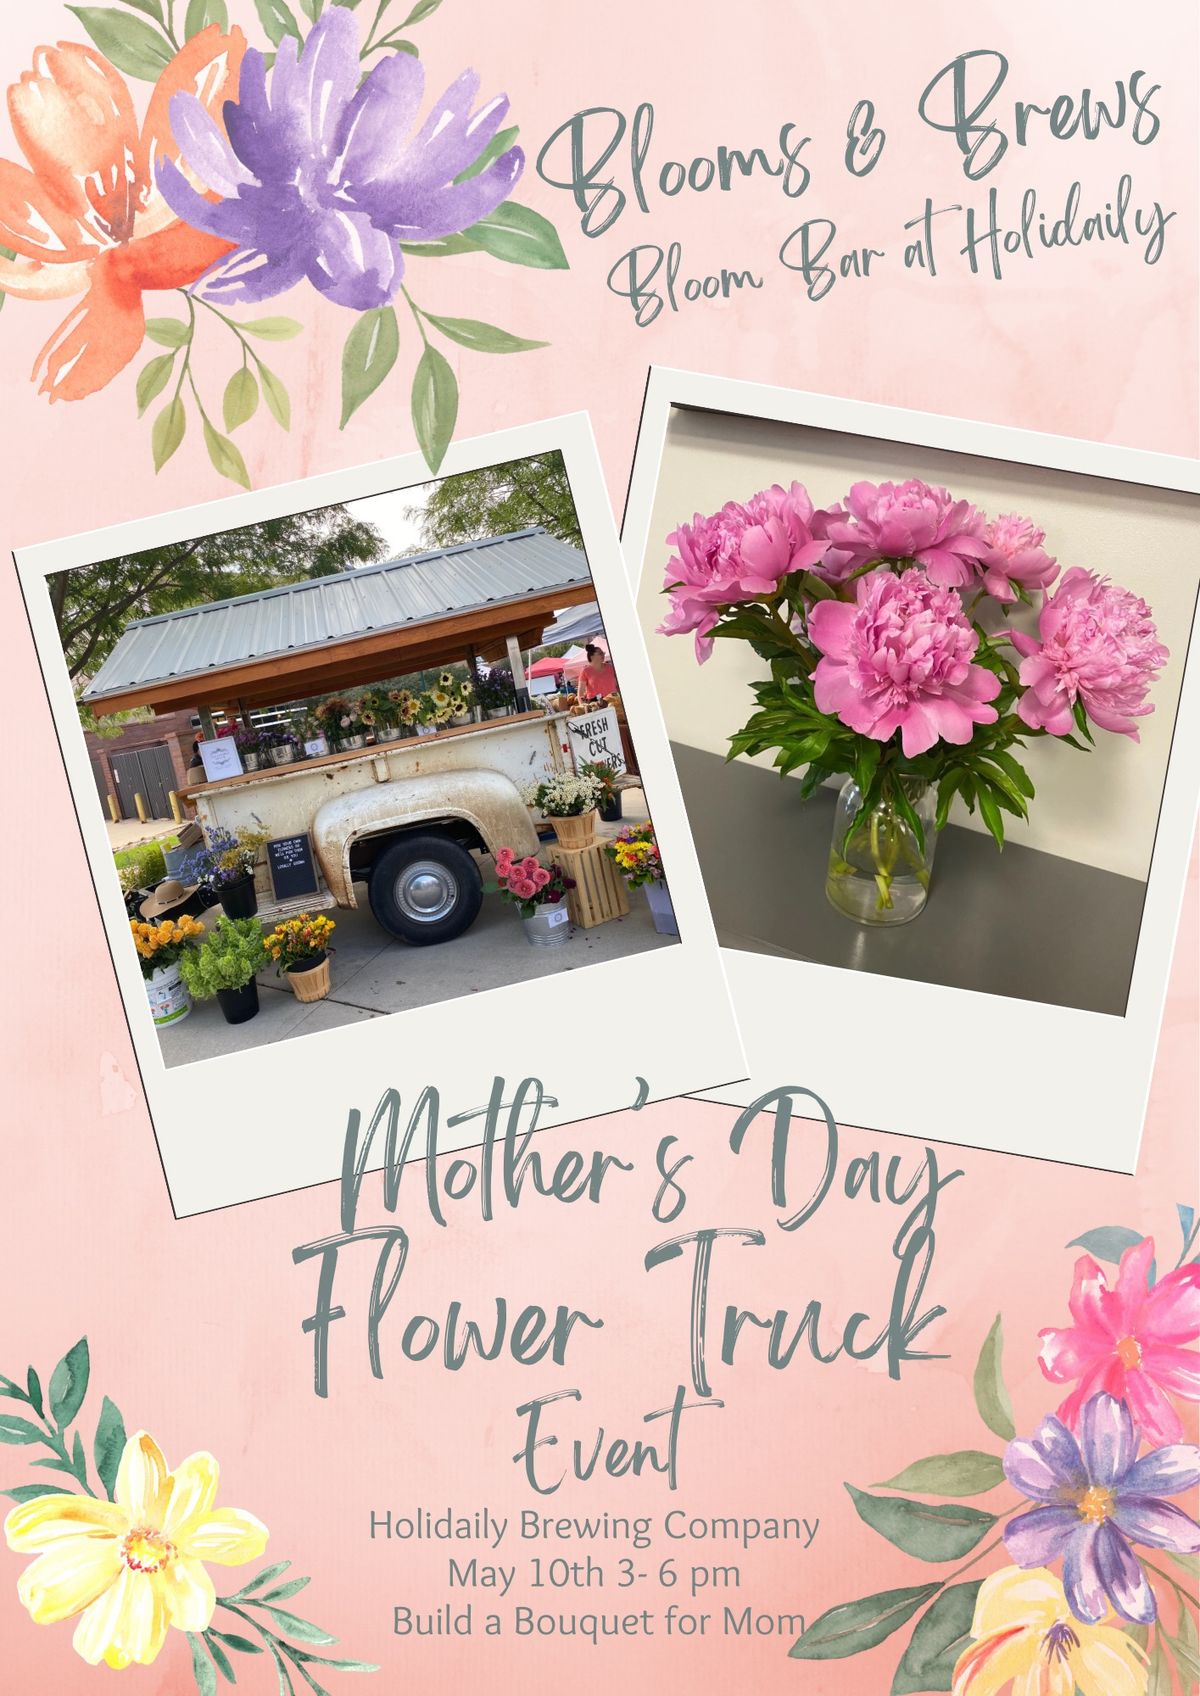 Blooms & Brews A Mother's Day Flower Truck Event at Holidaily Brewing Company in Golden